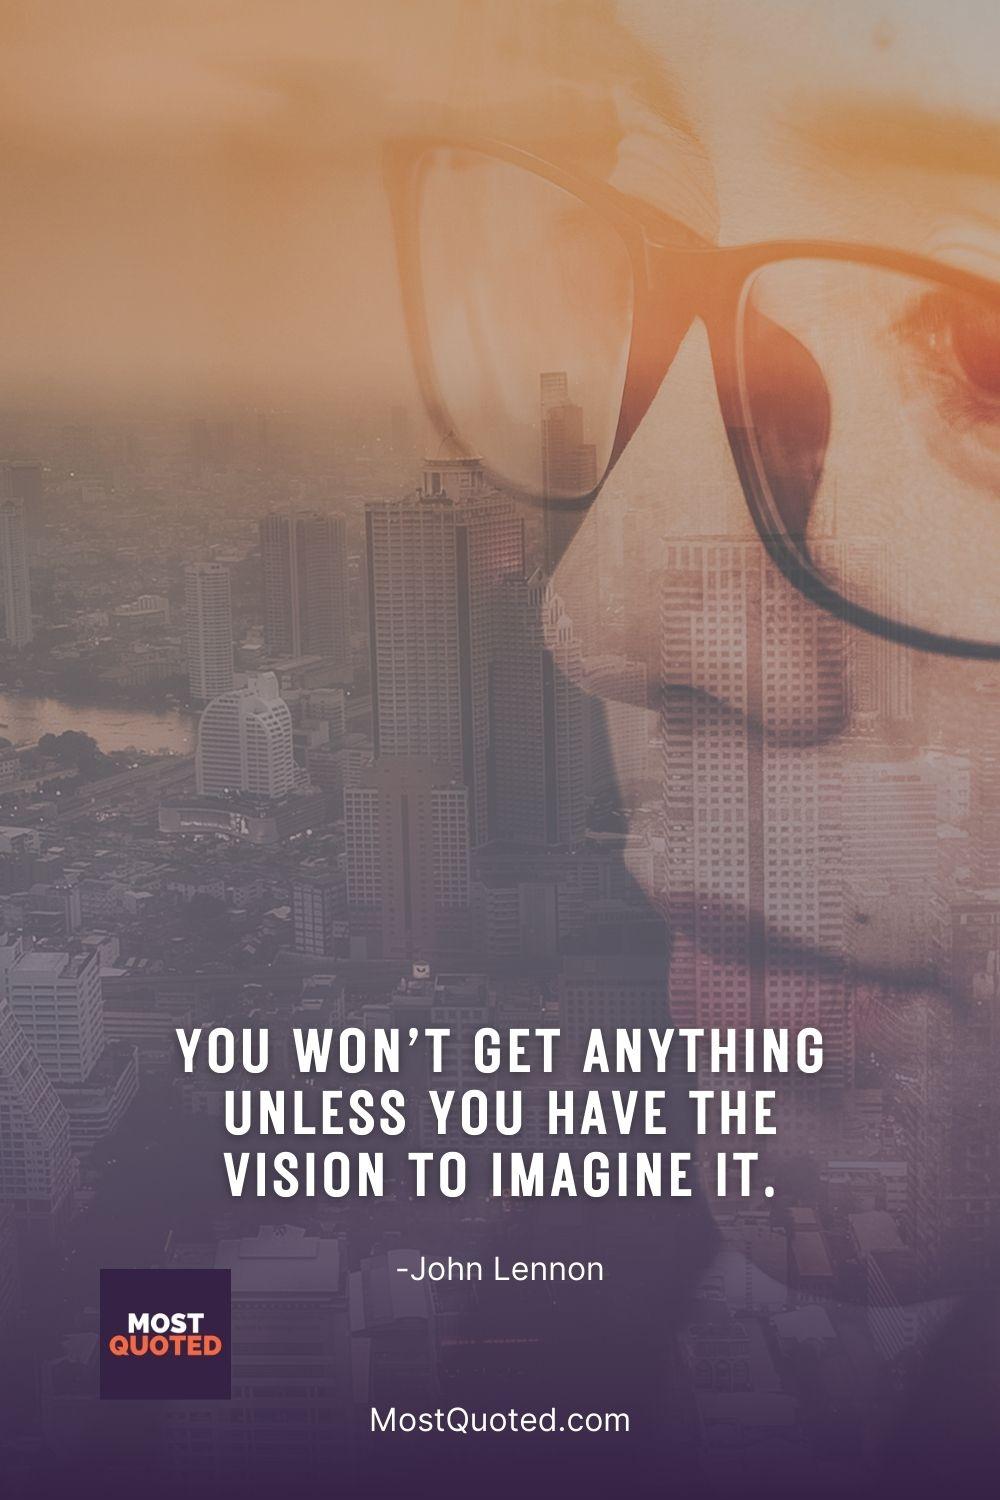 You won’t get anything unless you have the vision to imagine it. - John Lennon